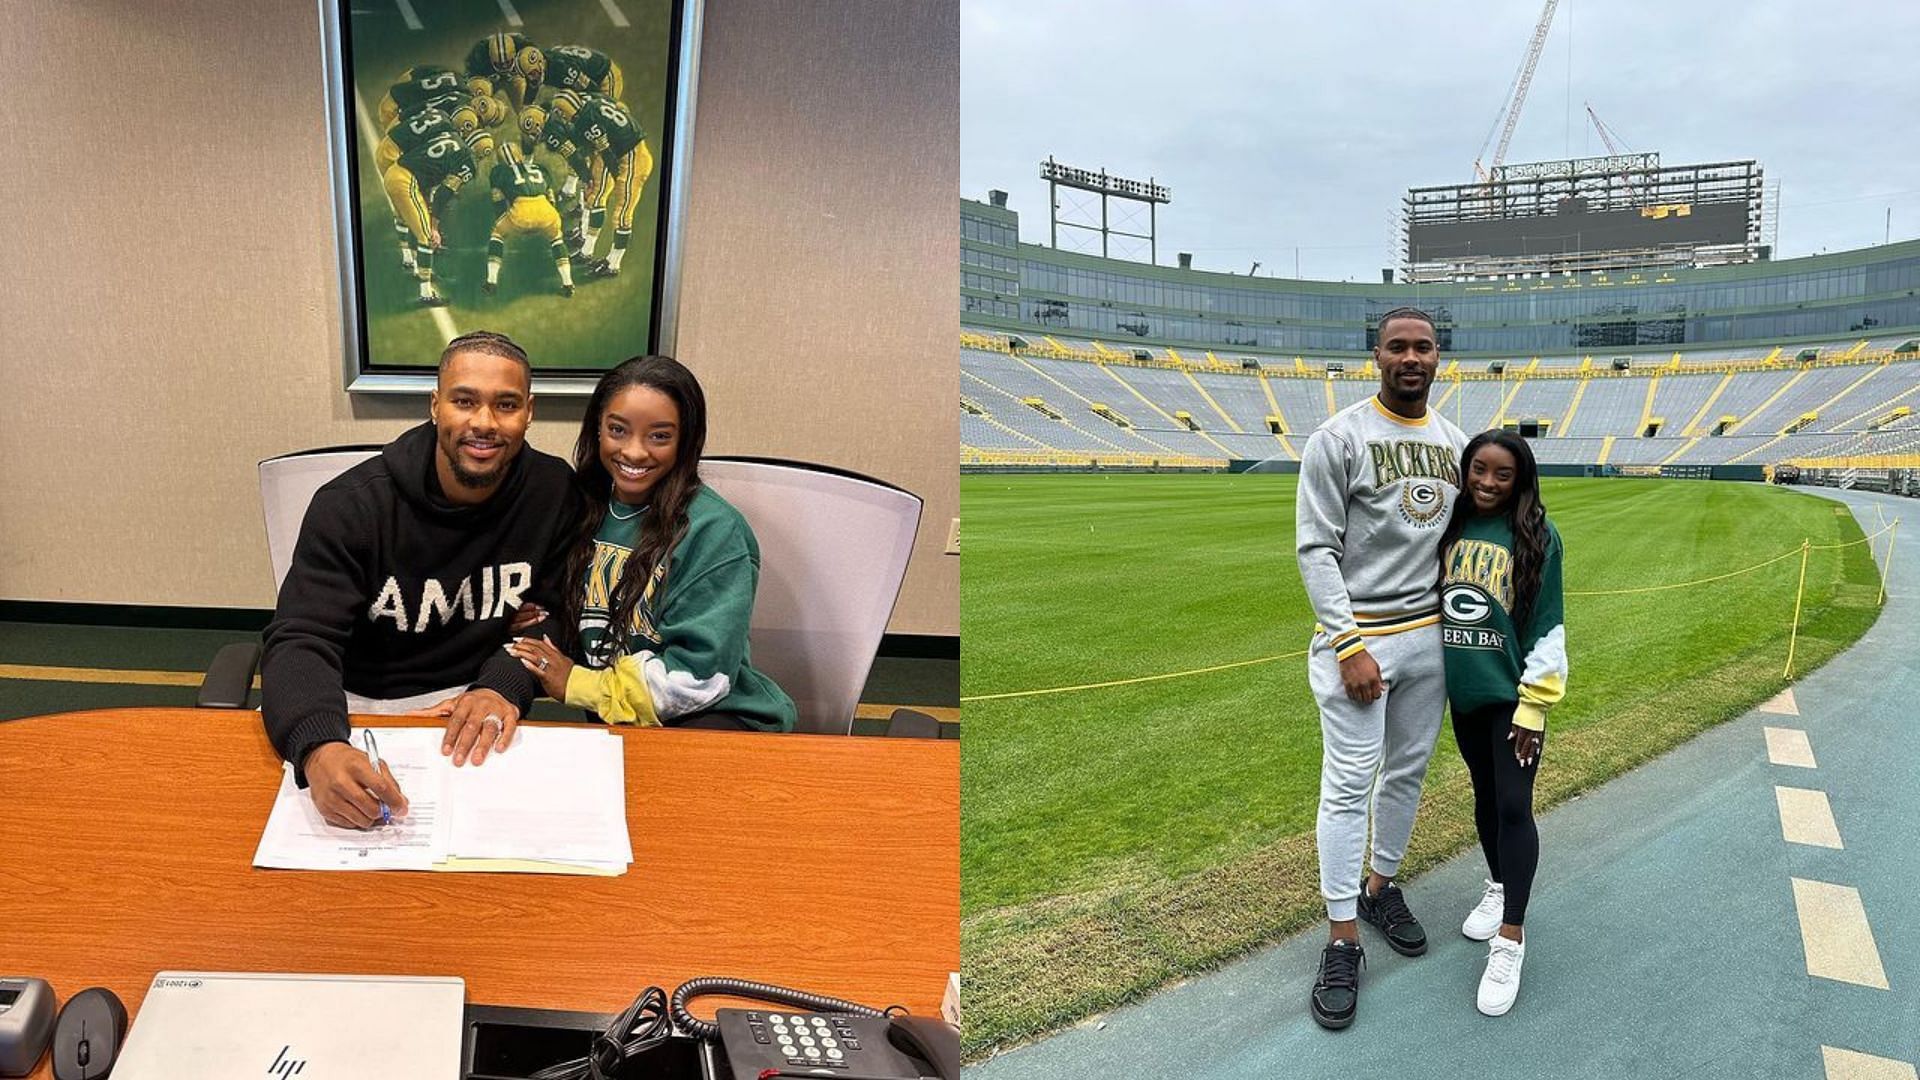 Simone Biles with Jonathan Owens as he signed for the Packers. Image credit: @simonebiles official IG